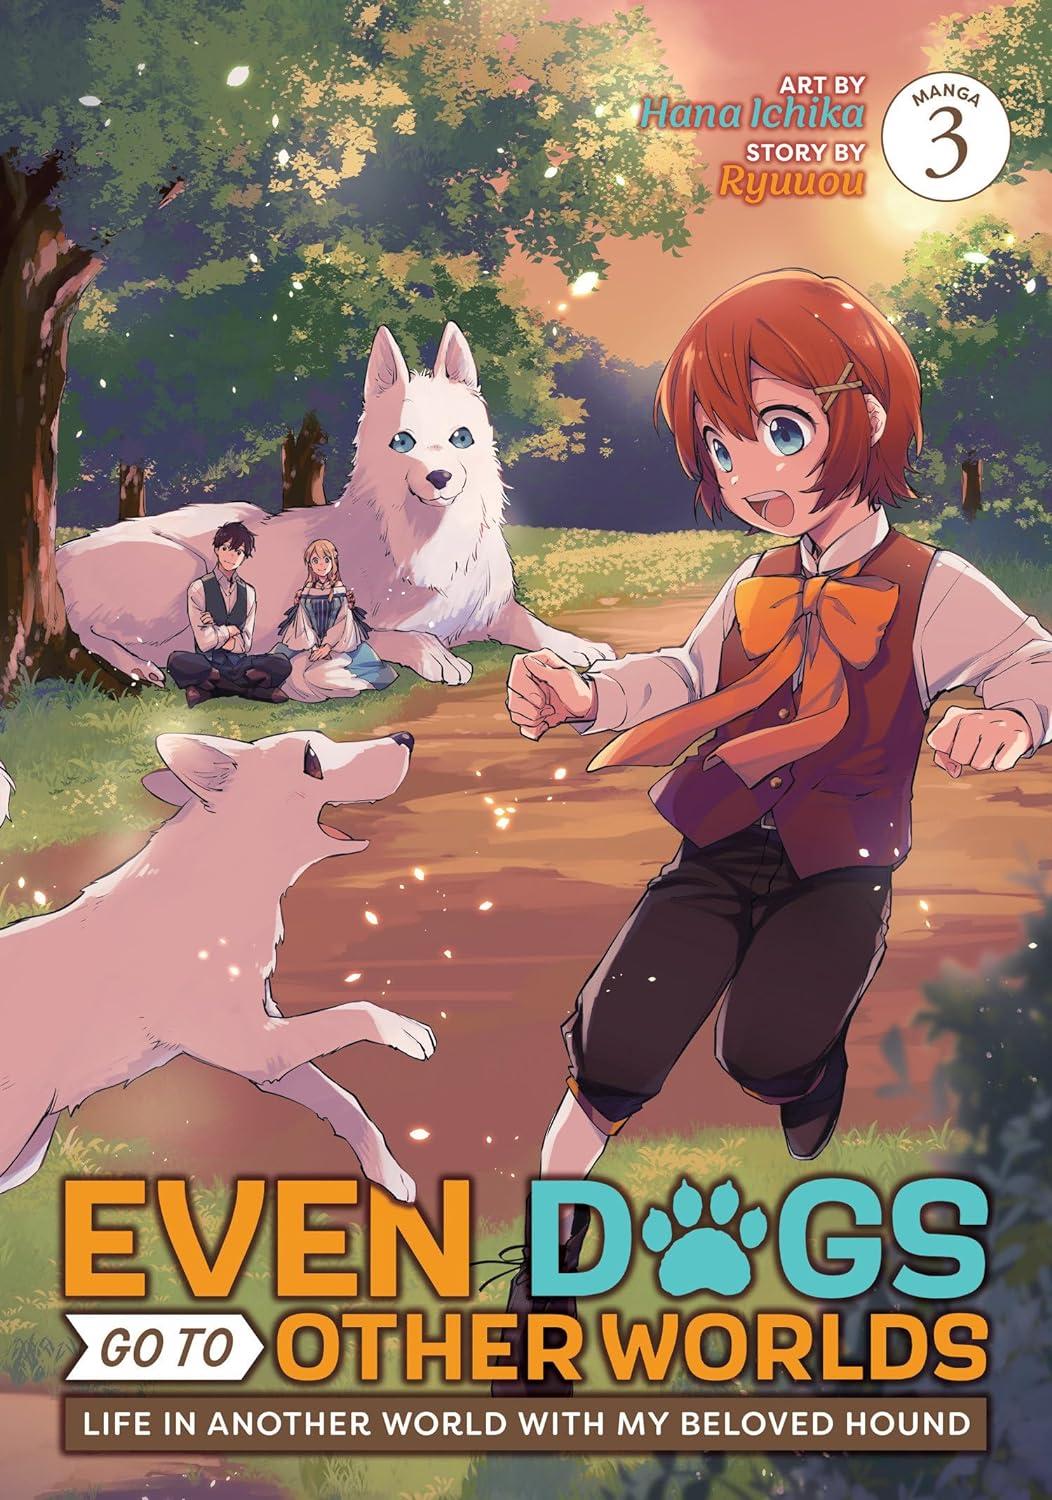 Even Dogs Go to Other Worlds: Life in Another World with My Beloved Hound (Manga) Vol. 03